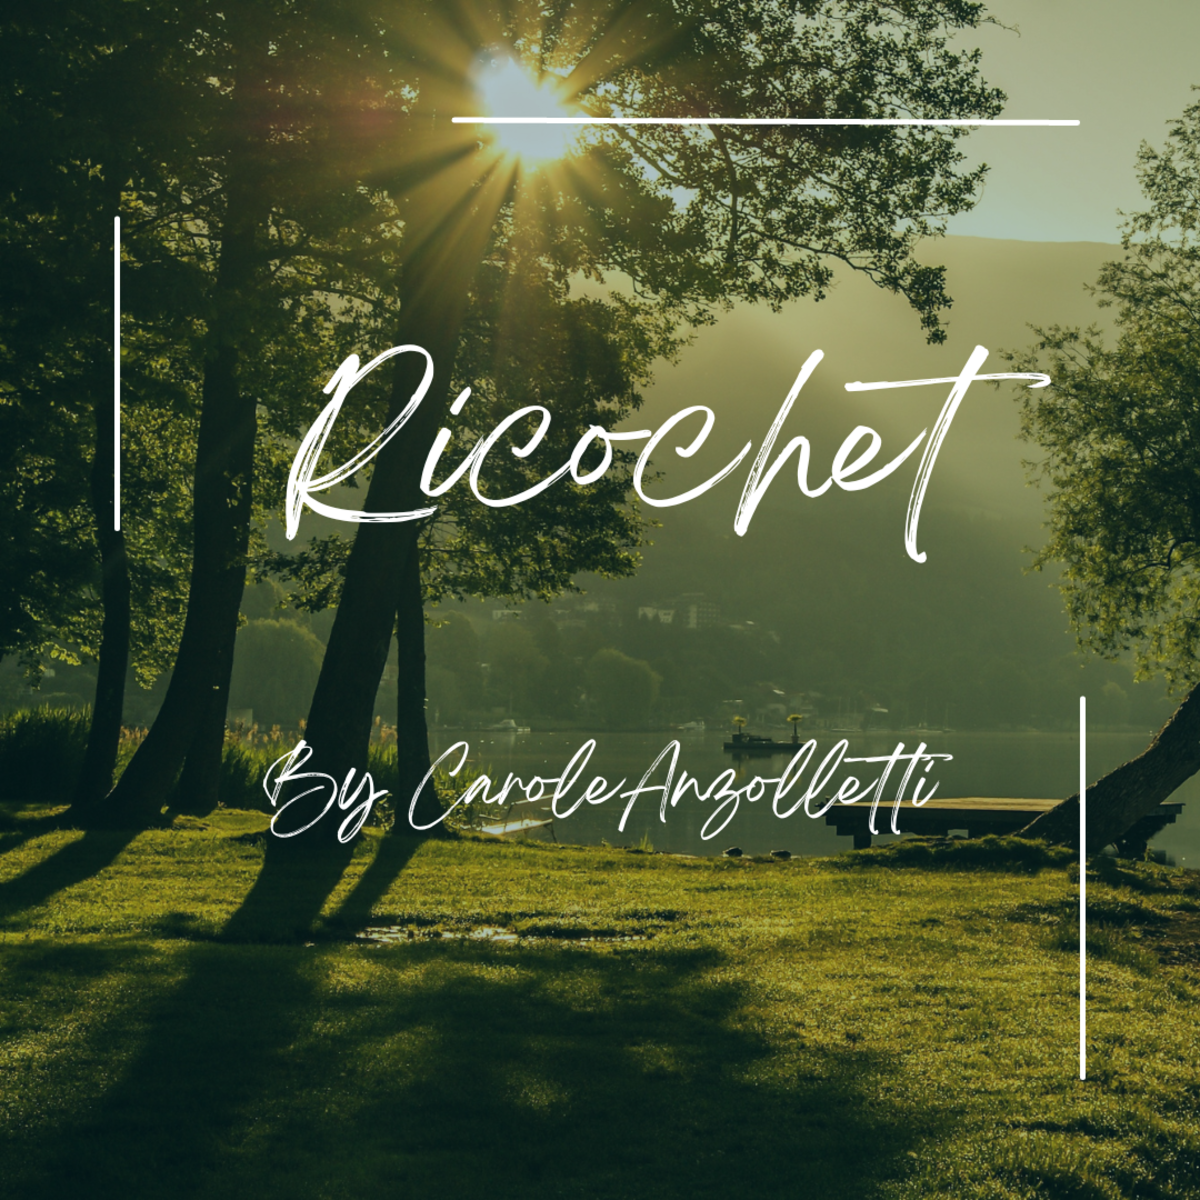 Ricochet - Poetry by Carole Anzolletti